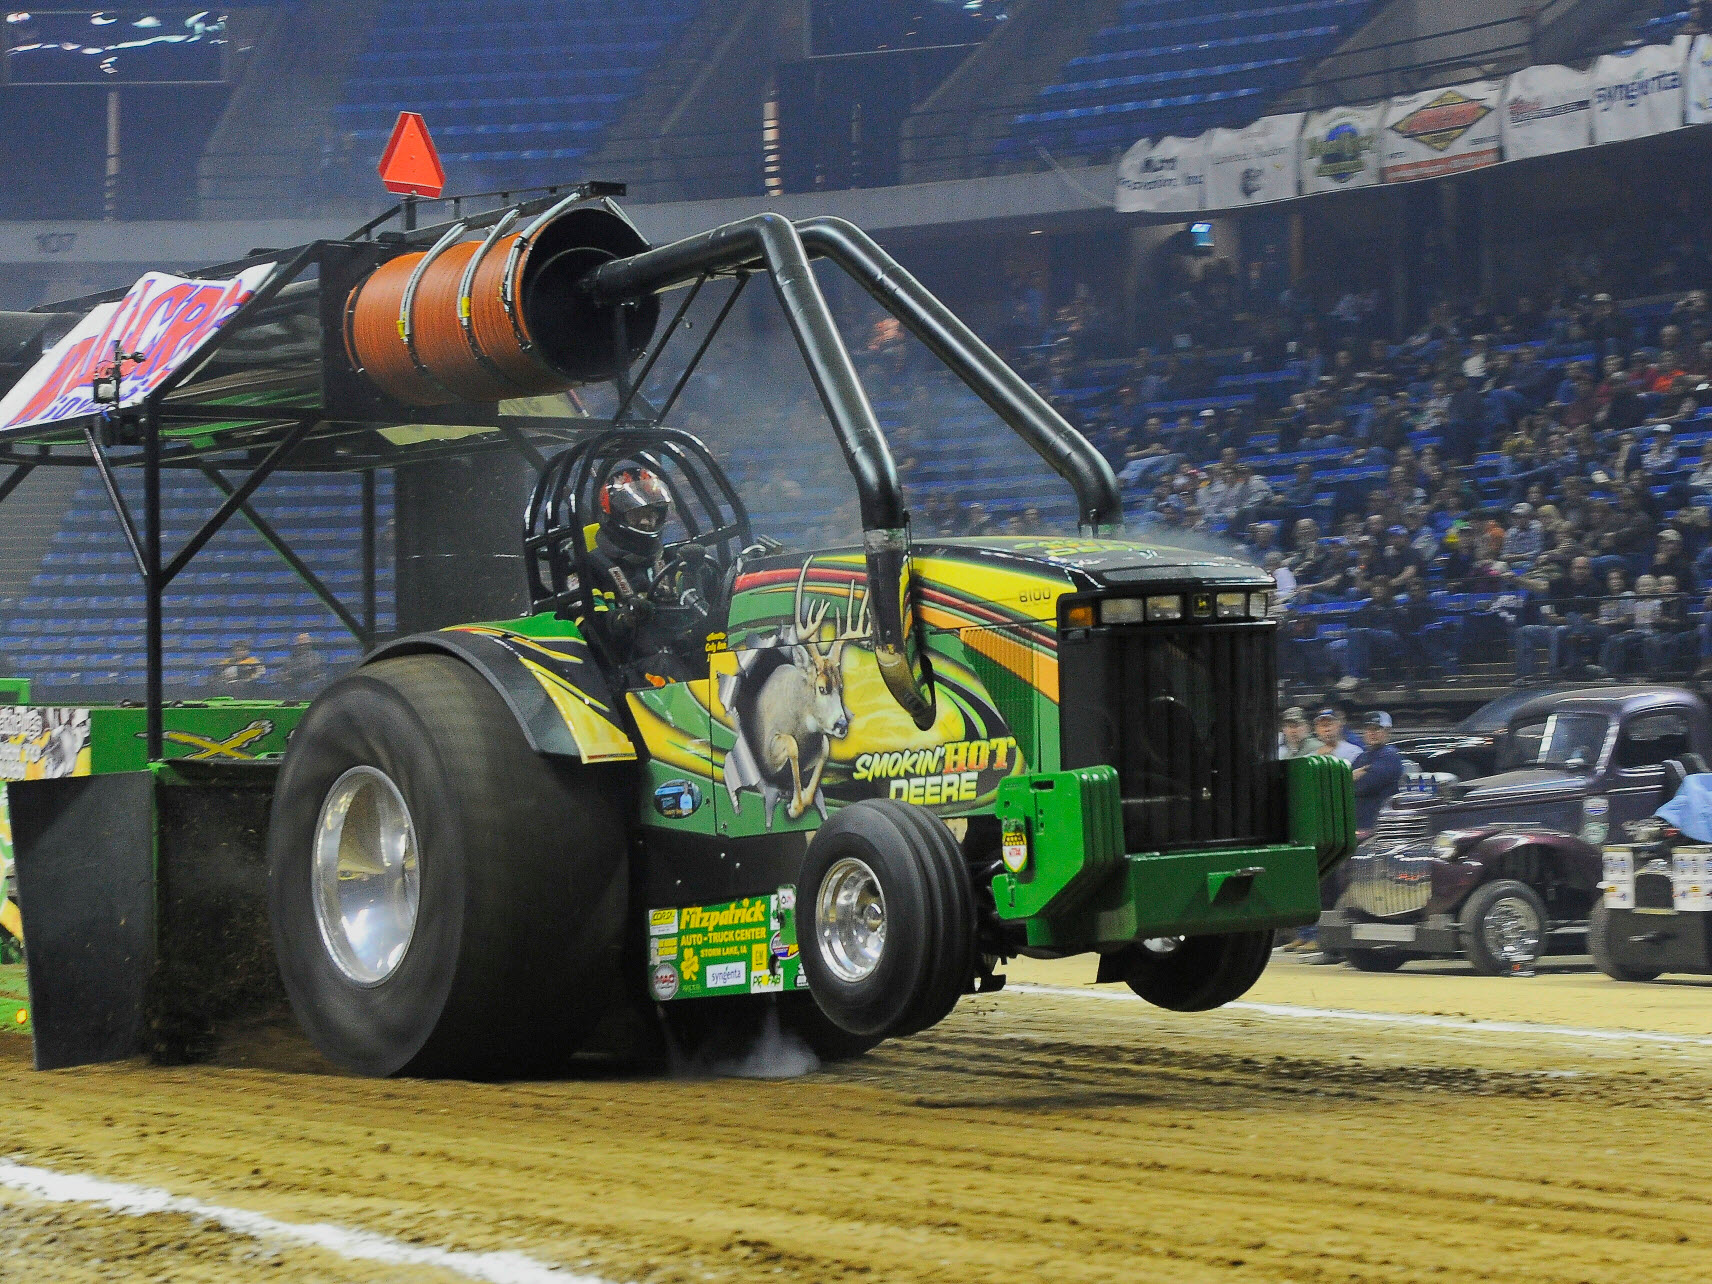 Western Farm Show - Championship Tractor Pull